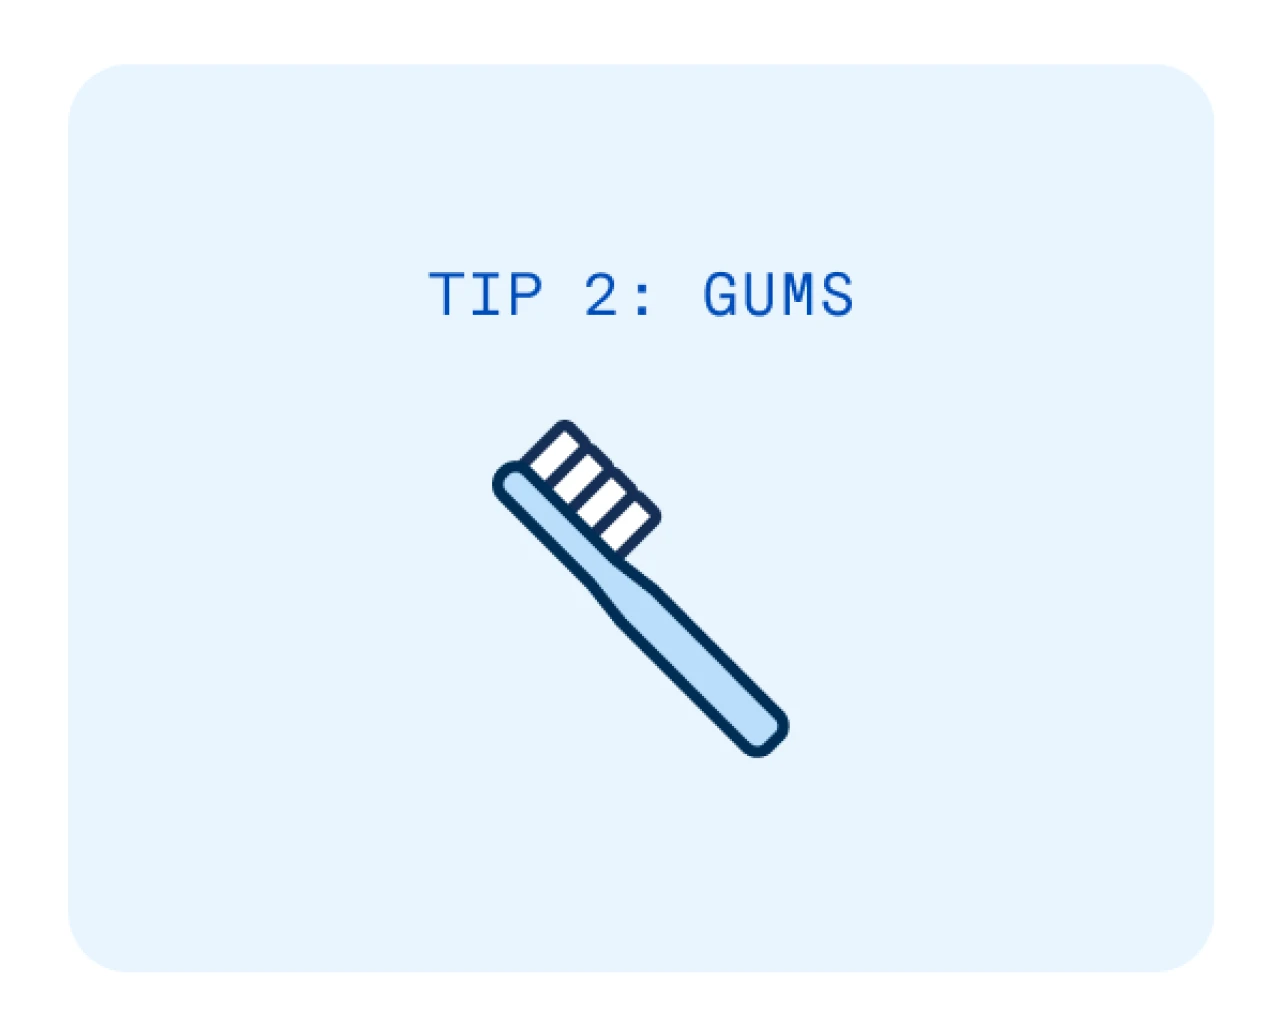 Toothbrush for gums icon